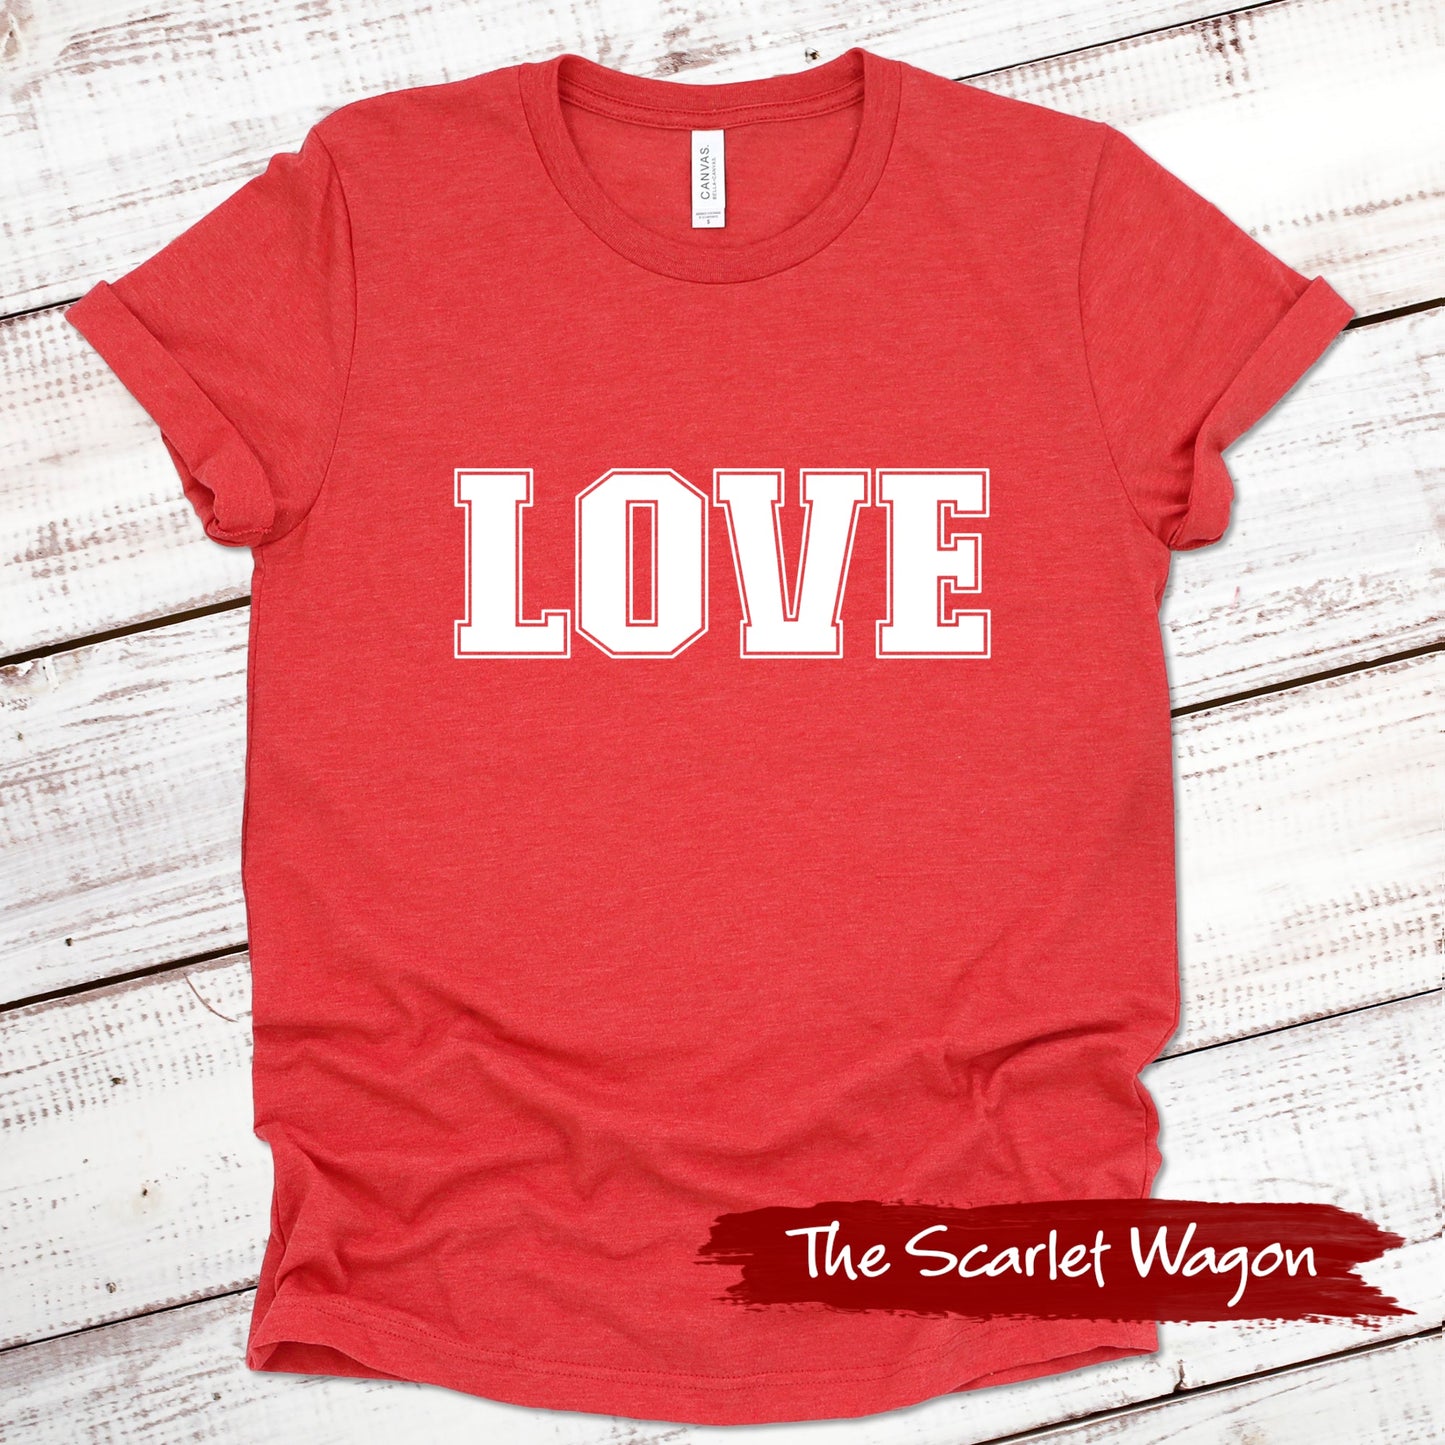 Sporty LOVE Christmas Shirt Scarlet Wagon Heather Red XS 